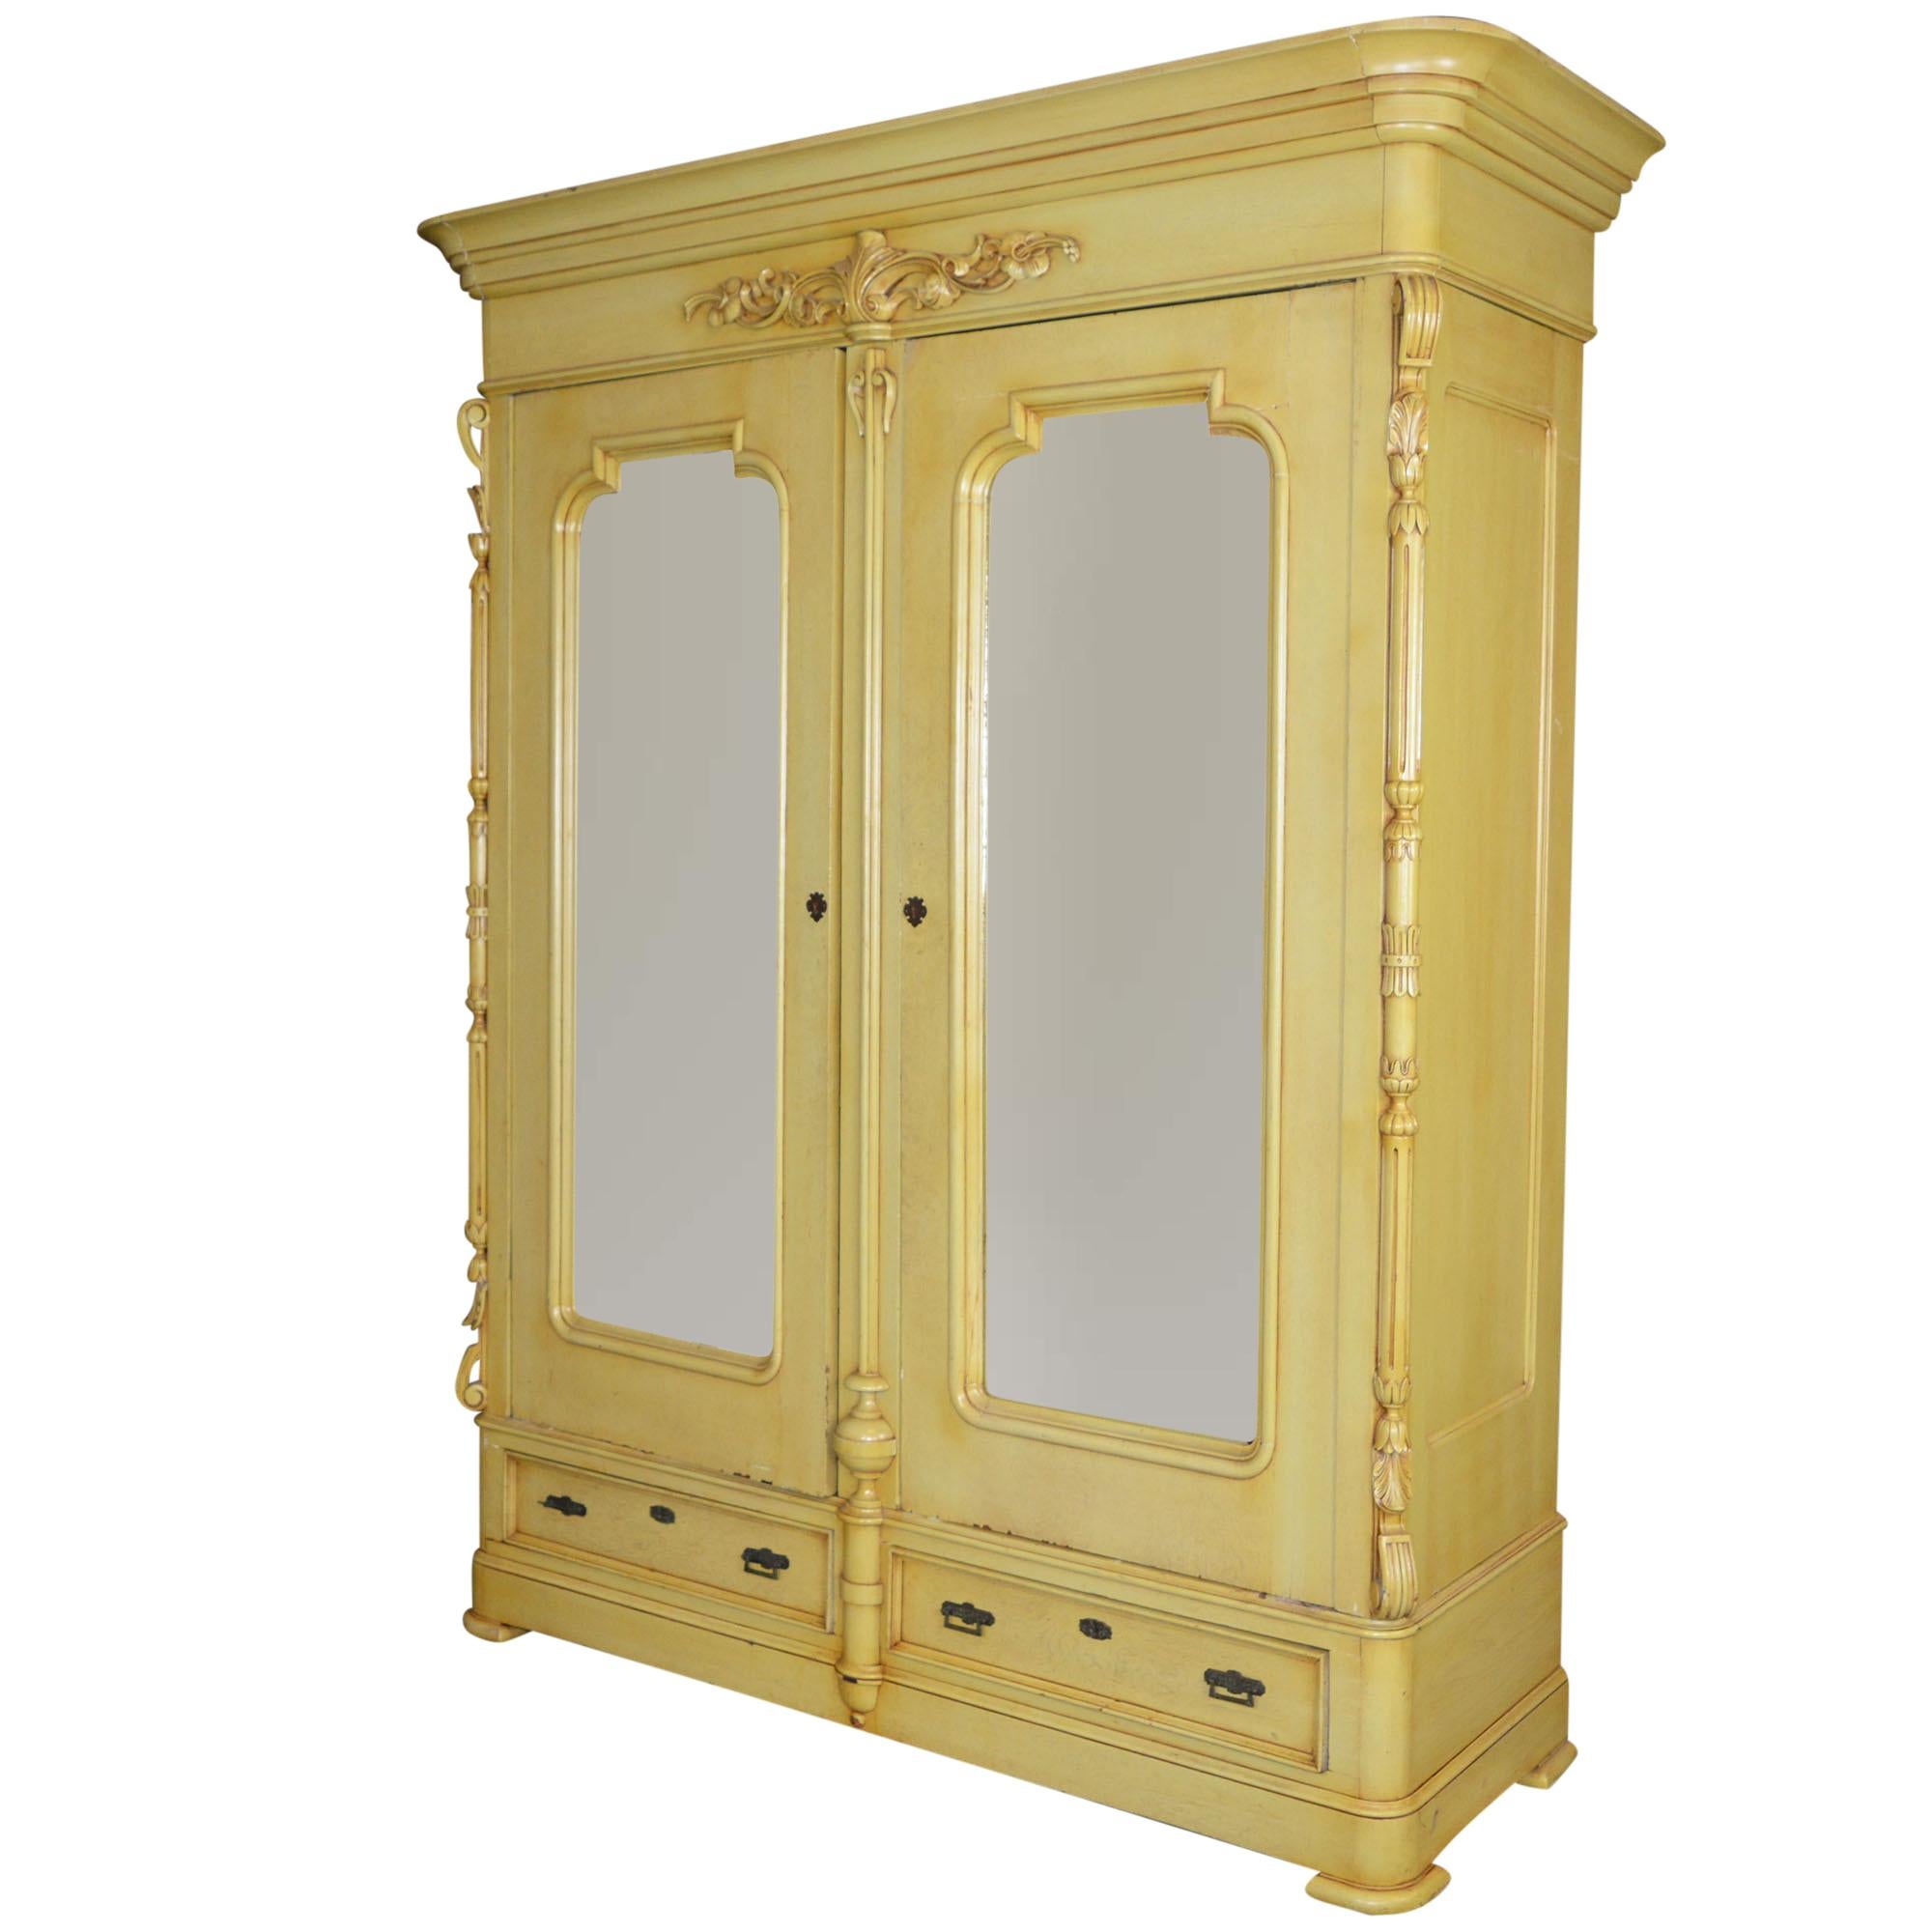 Painted Tall Antique Cabinet with Mirrored Doors Adjustable Shelves and Two Drawers For Sale